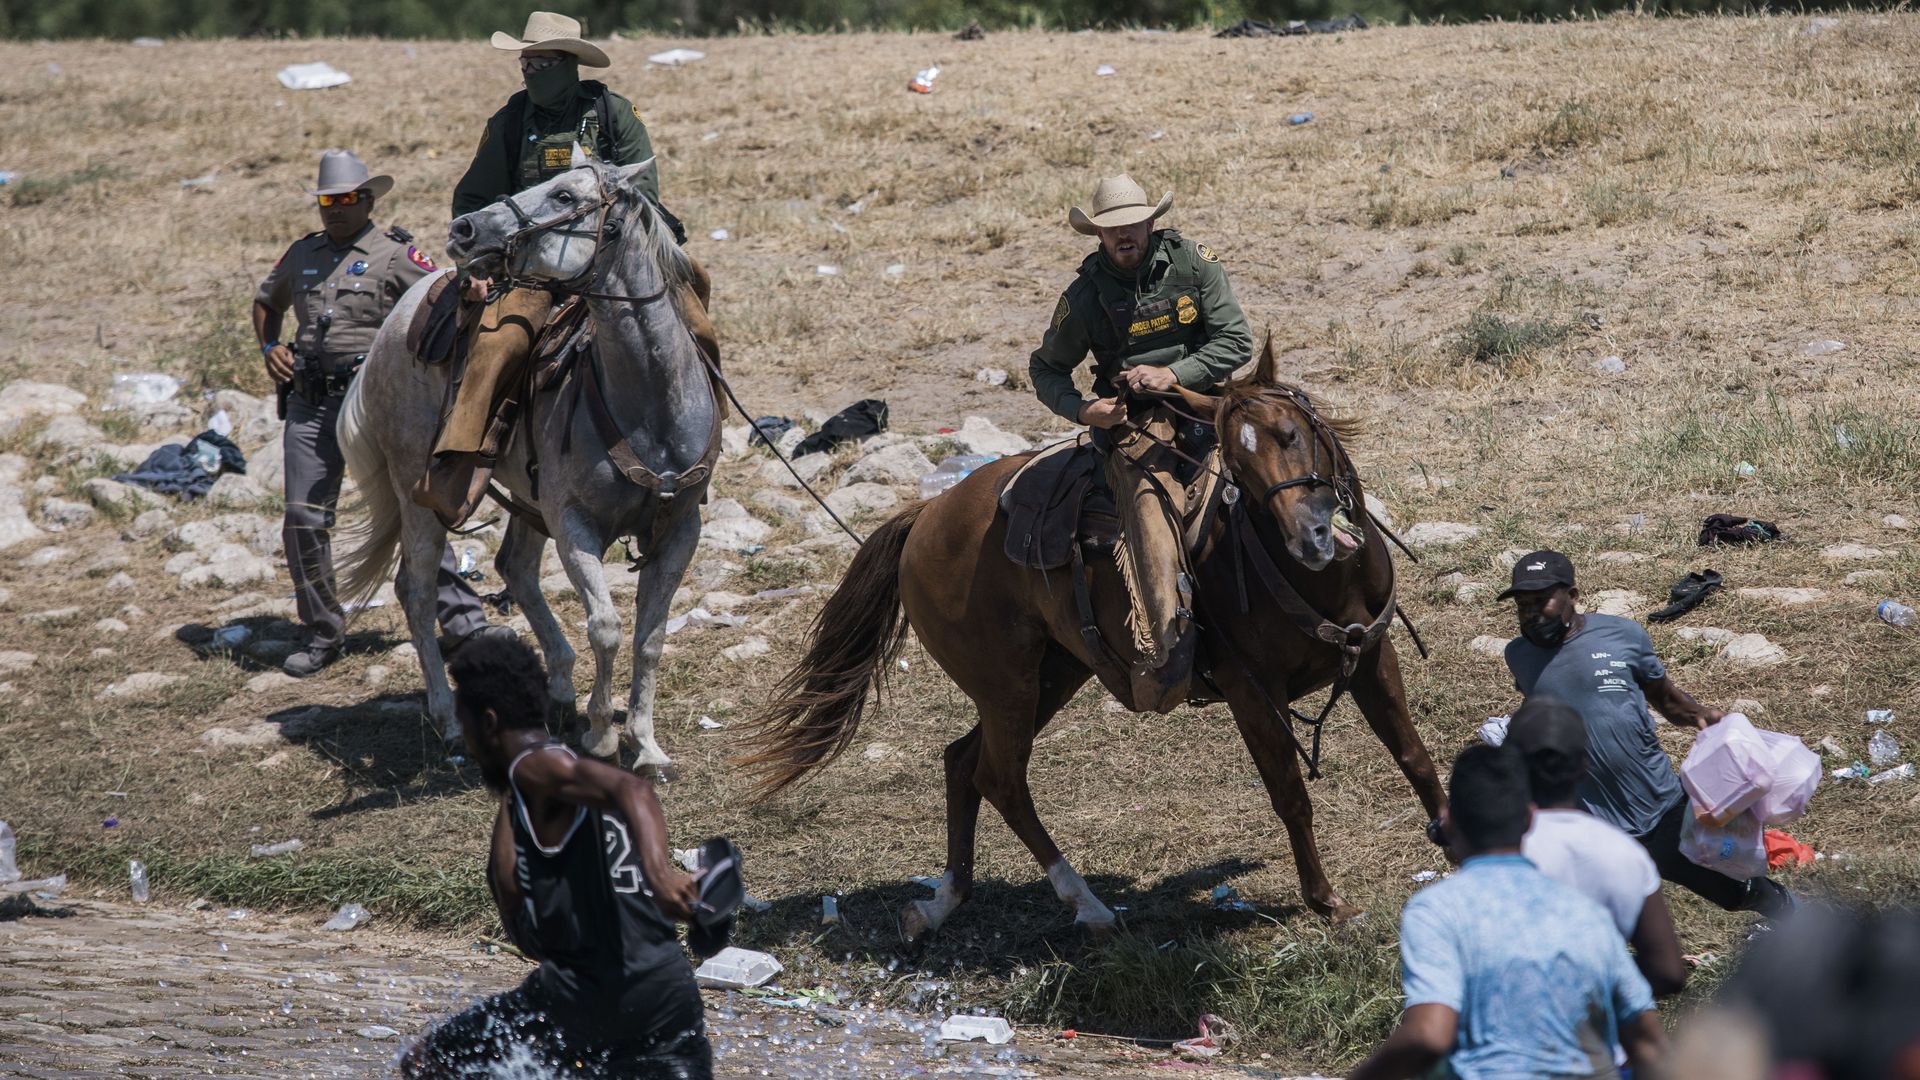 U.S. Customs and Border Protection mounted officers attempt to contain migrants as they cross the Rio Grande on Sunday.